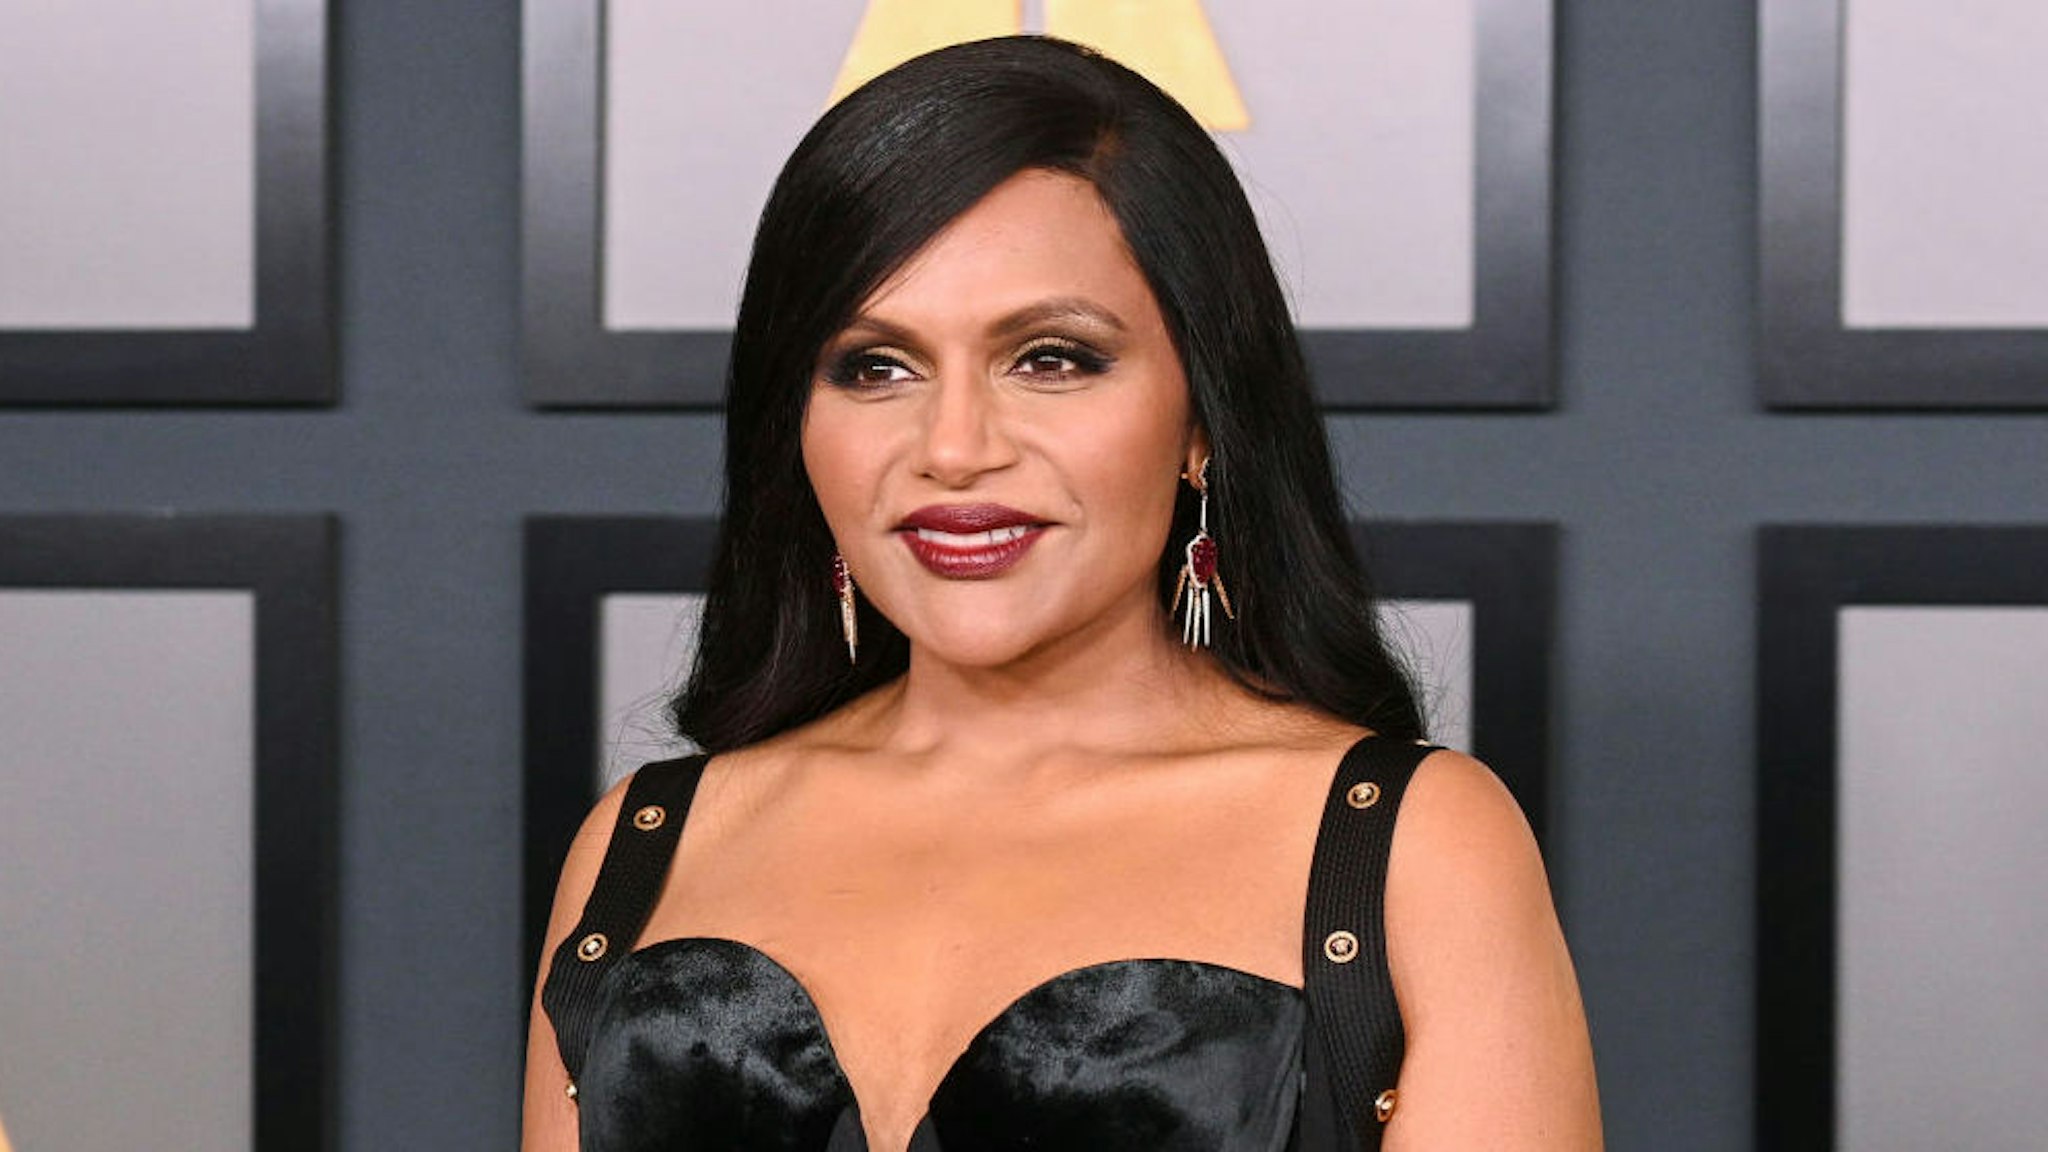 Mindy Kaling at the Academys 13th Governors Awards held at the Fairmont Century Plaza on November 19, 2022 in Los Angeles, California. (